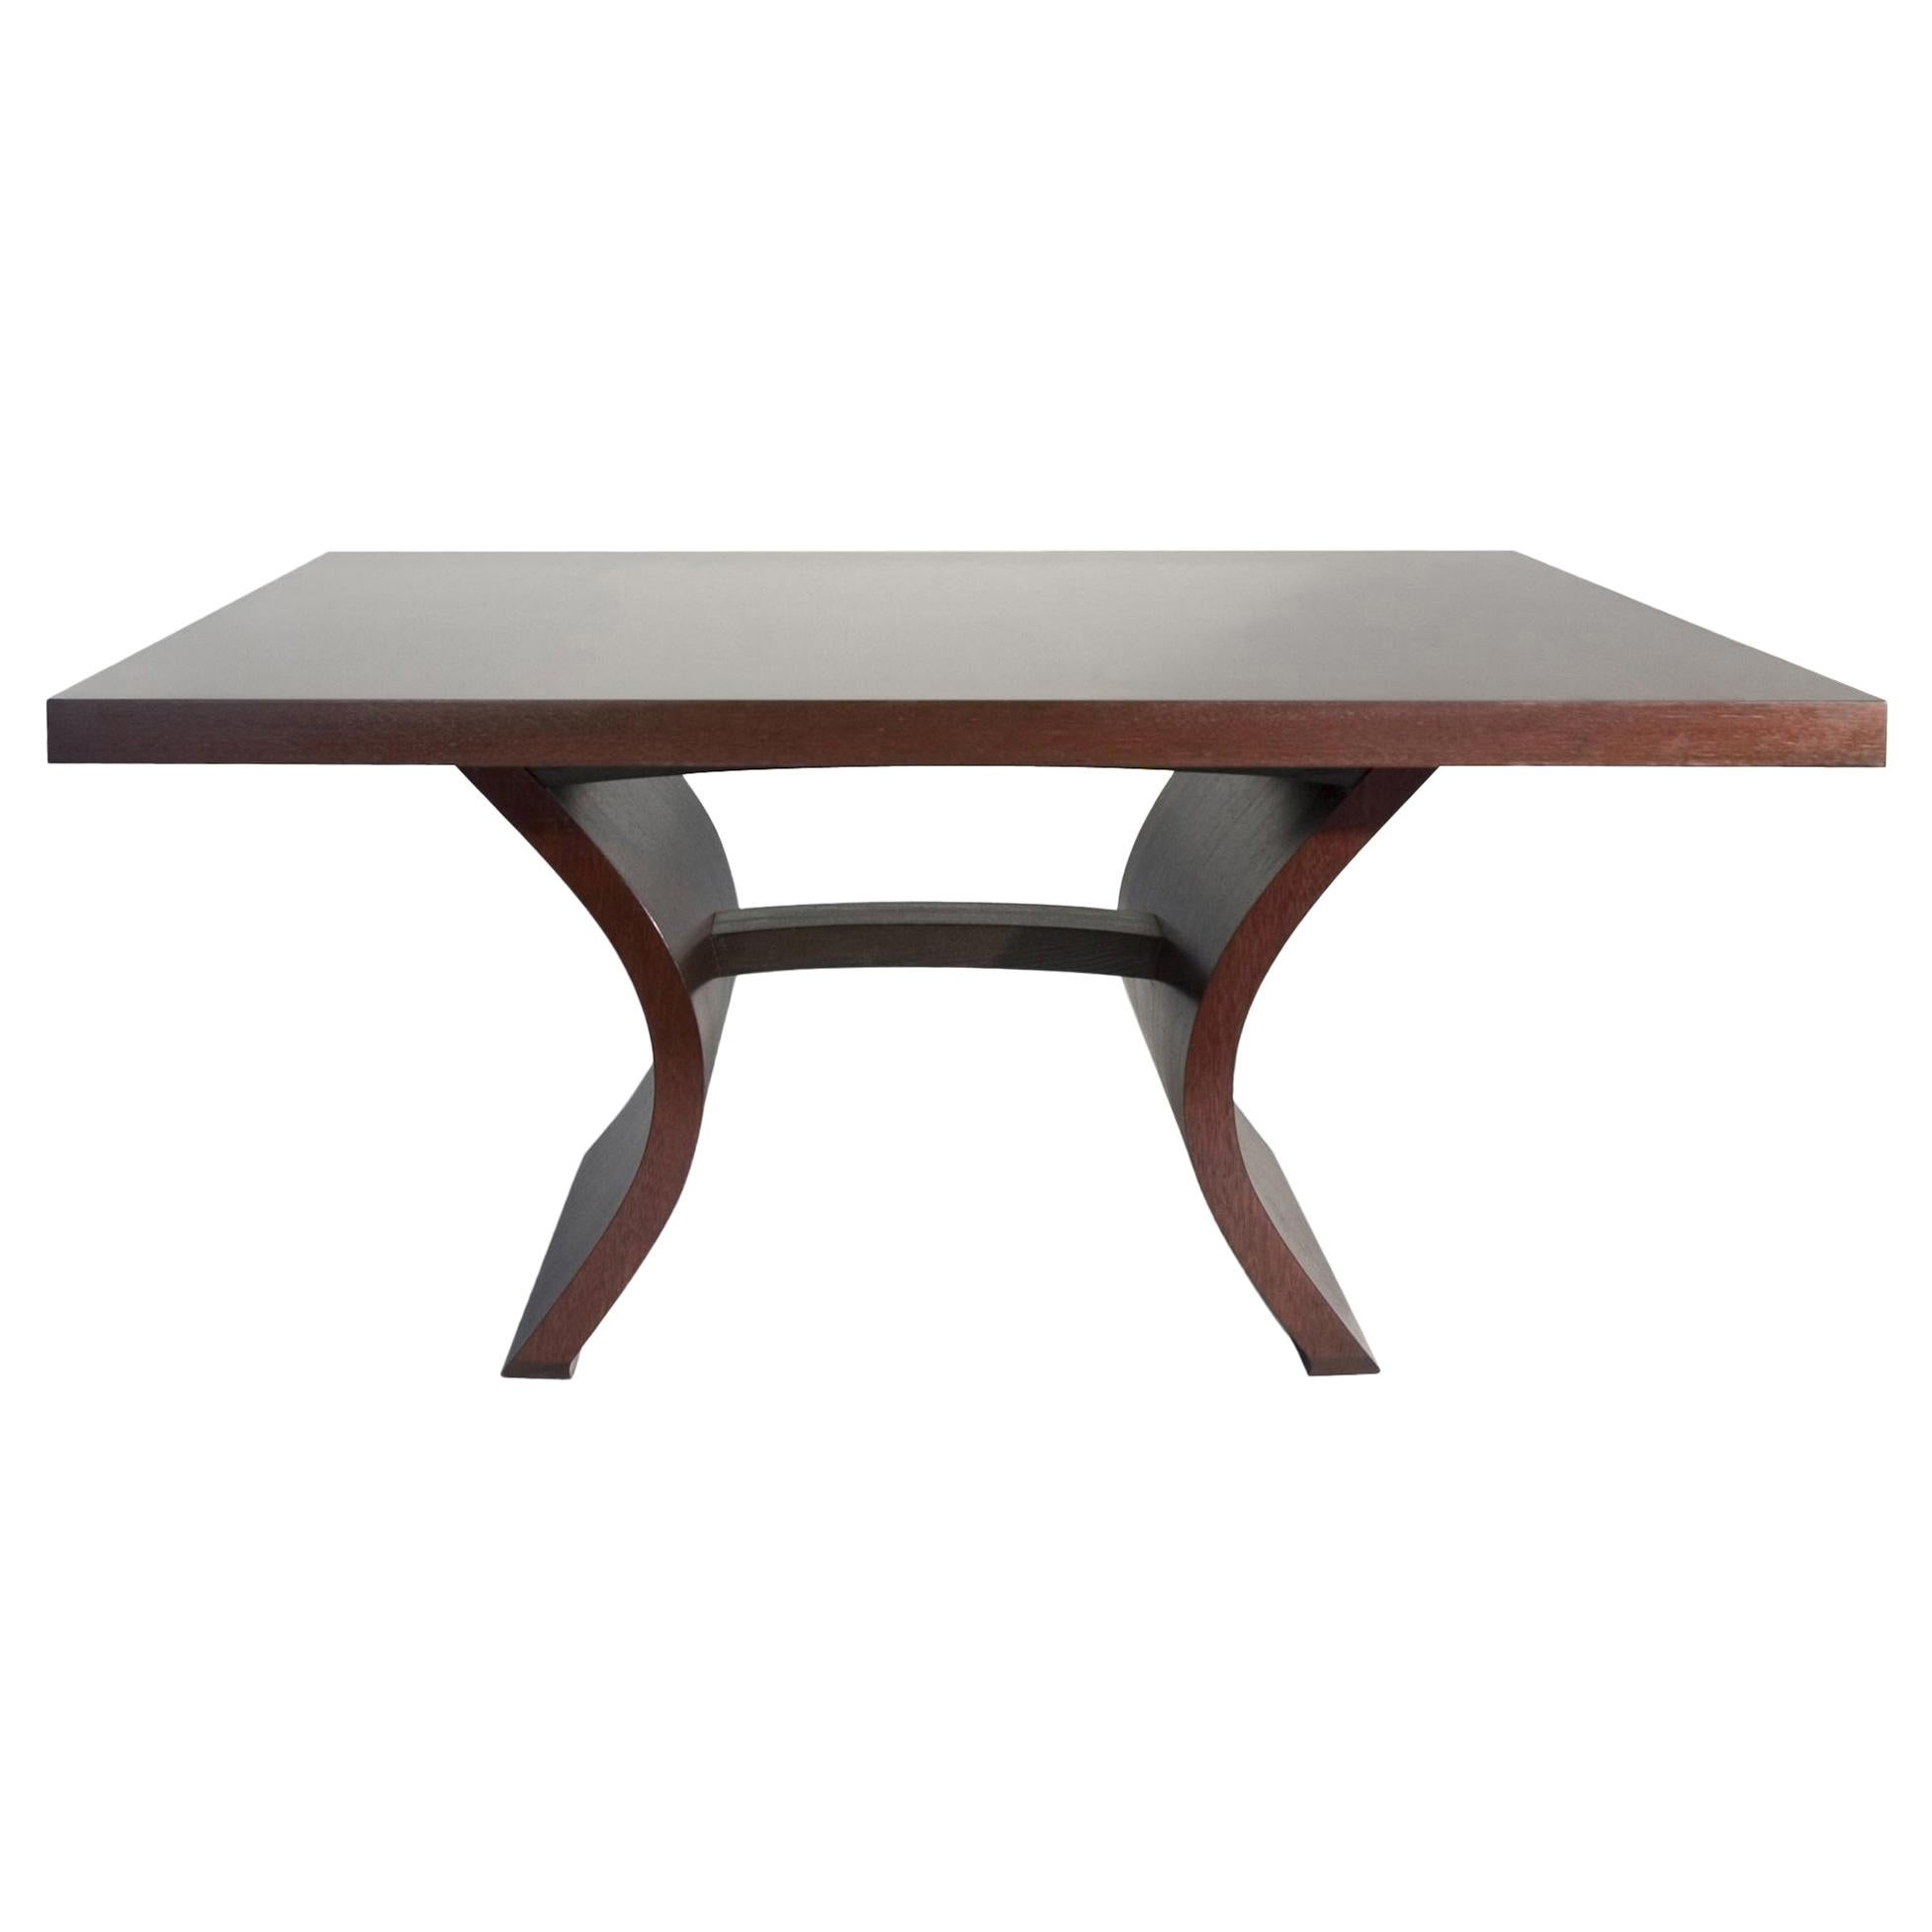 Gregory Clark Dining Room Tables